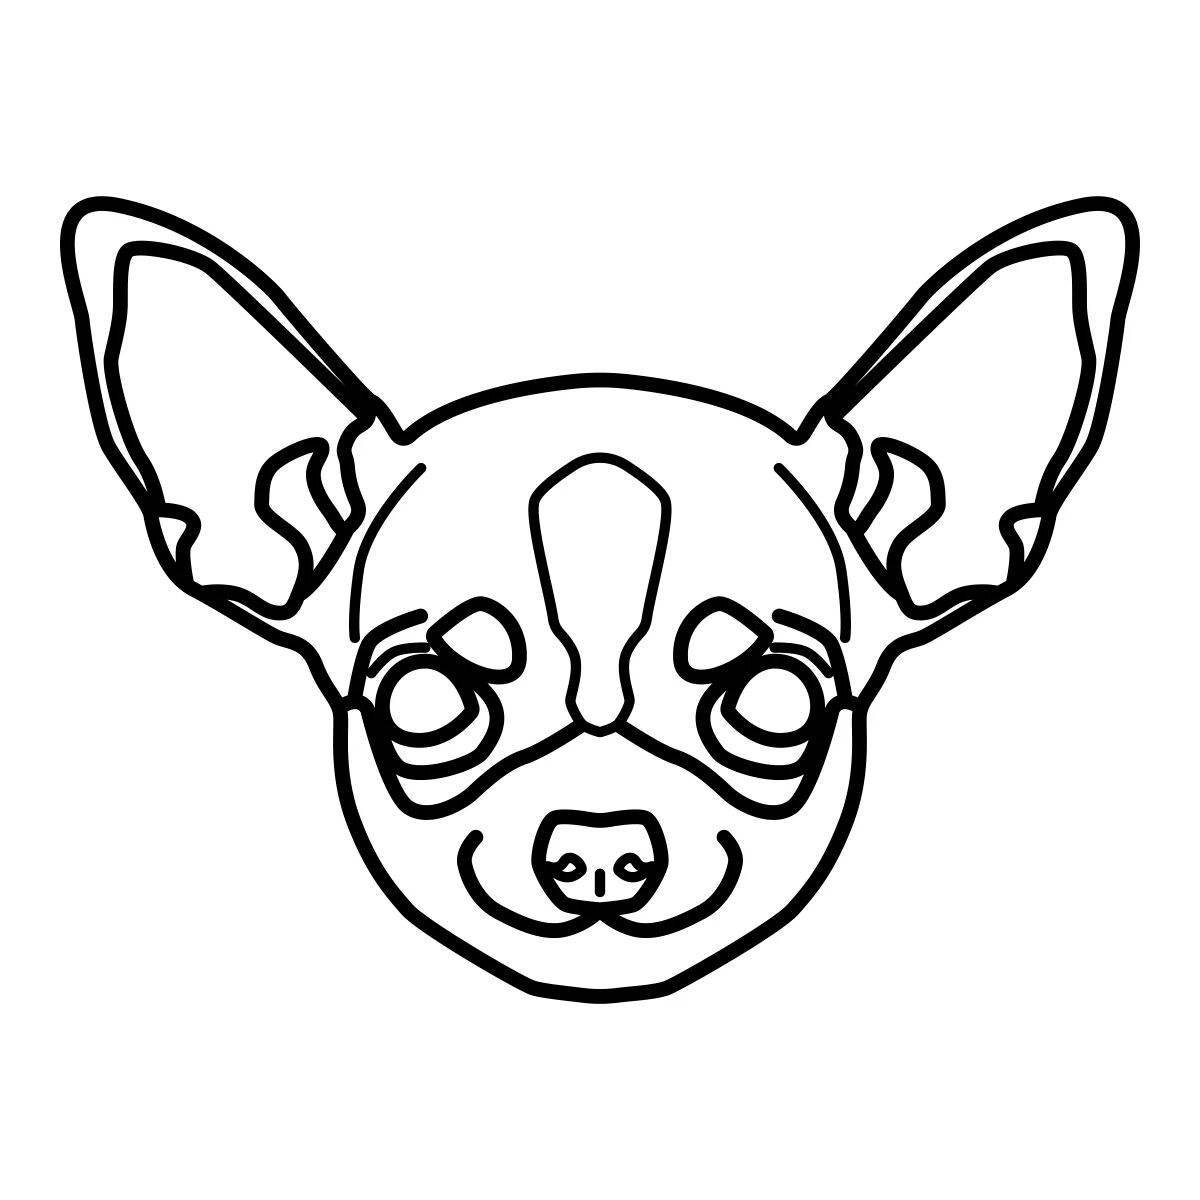 Creative chihuahua coloring book for kids